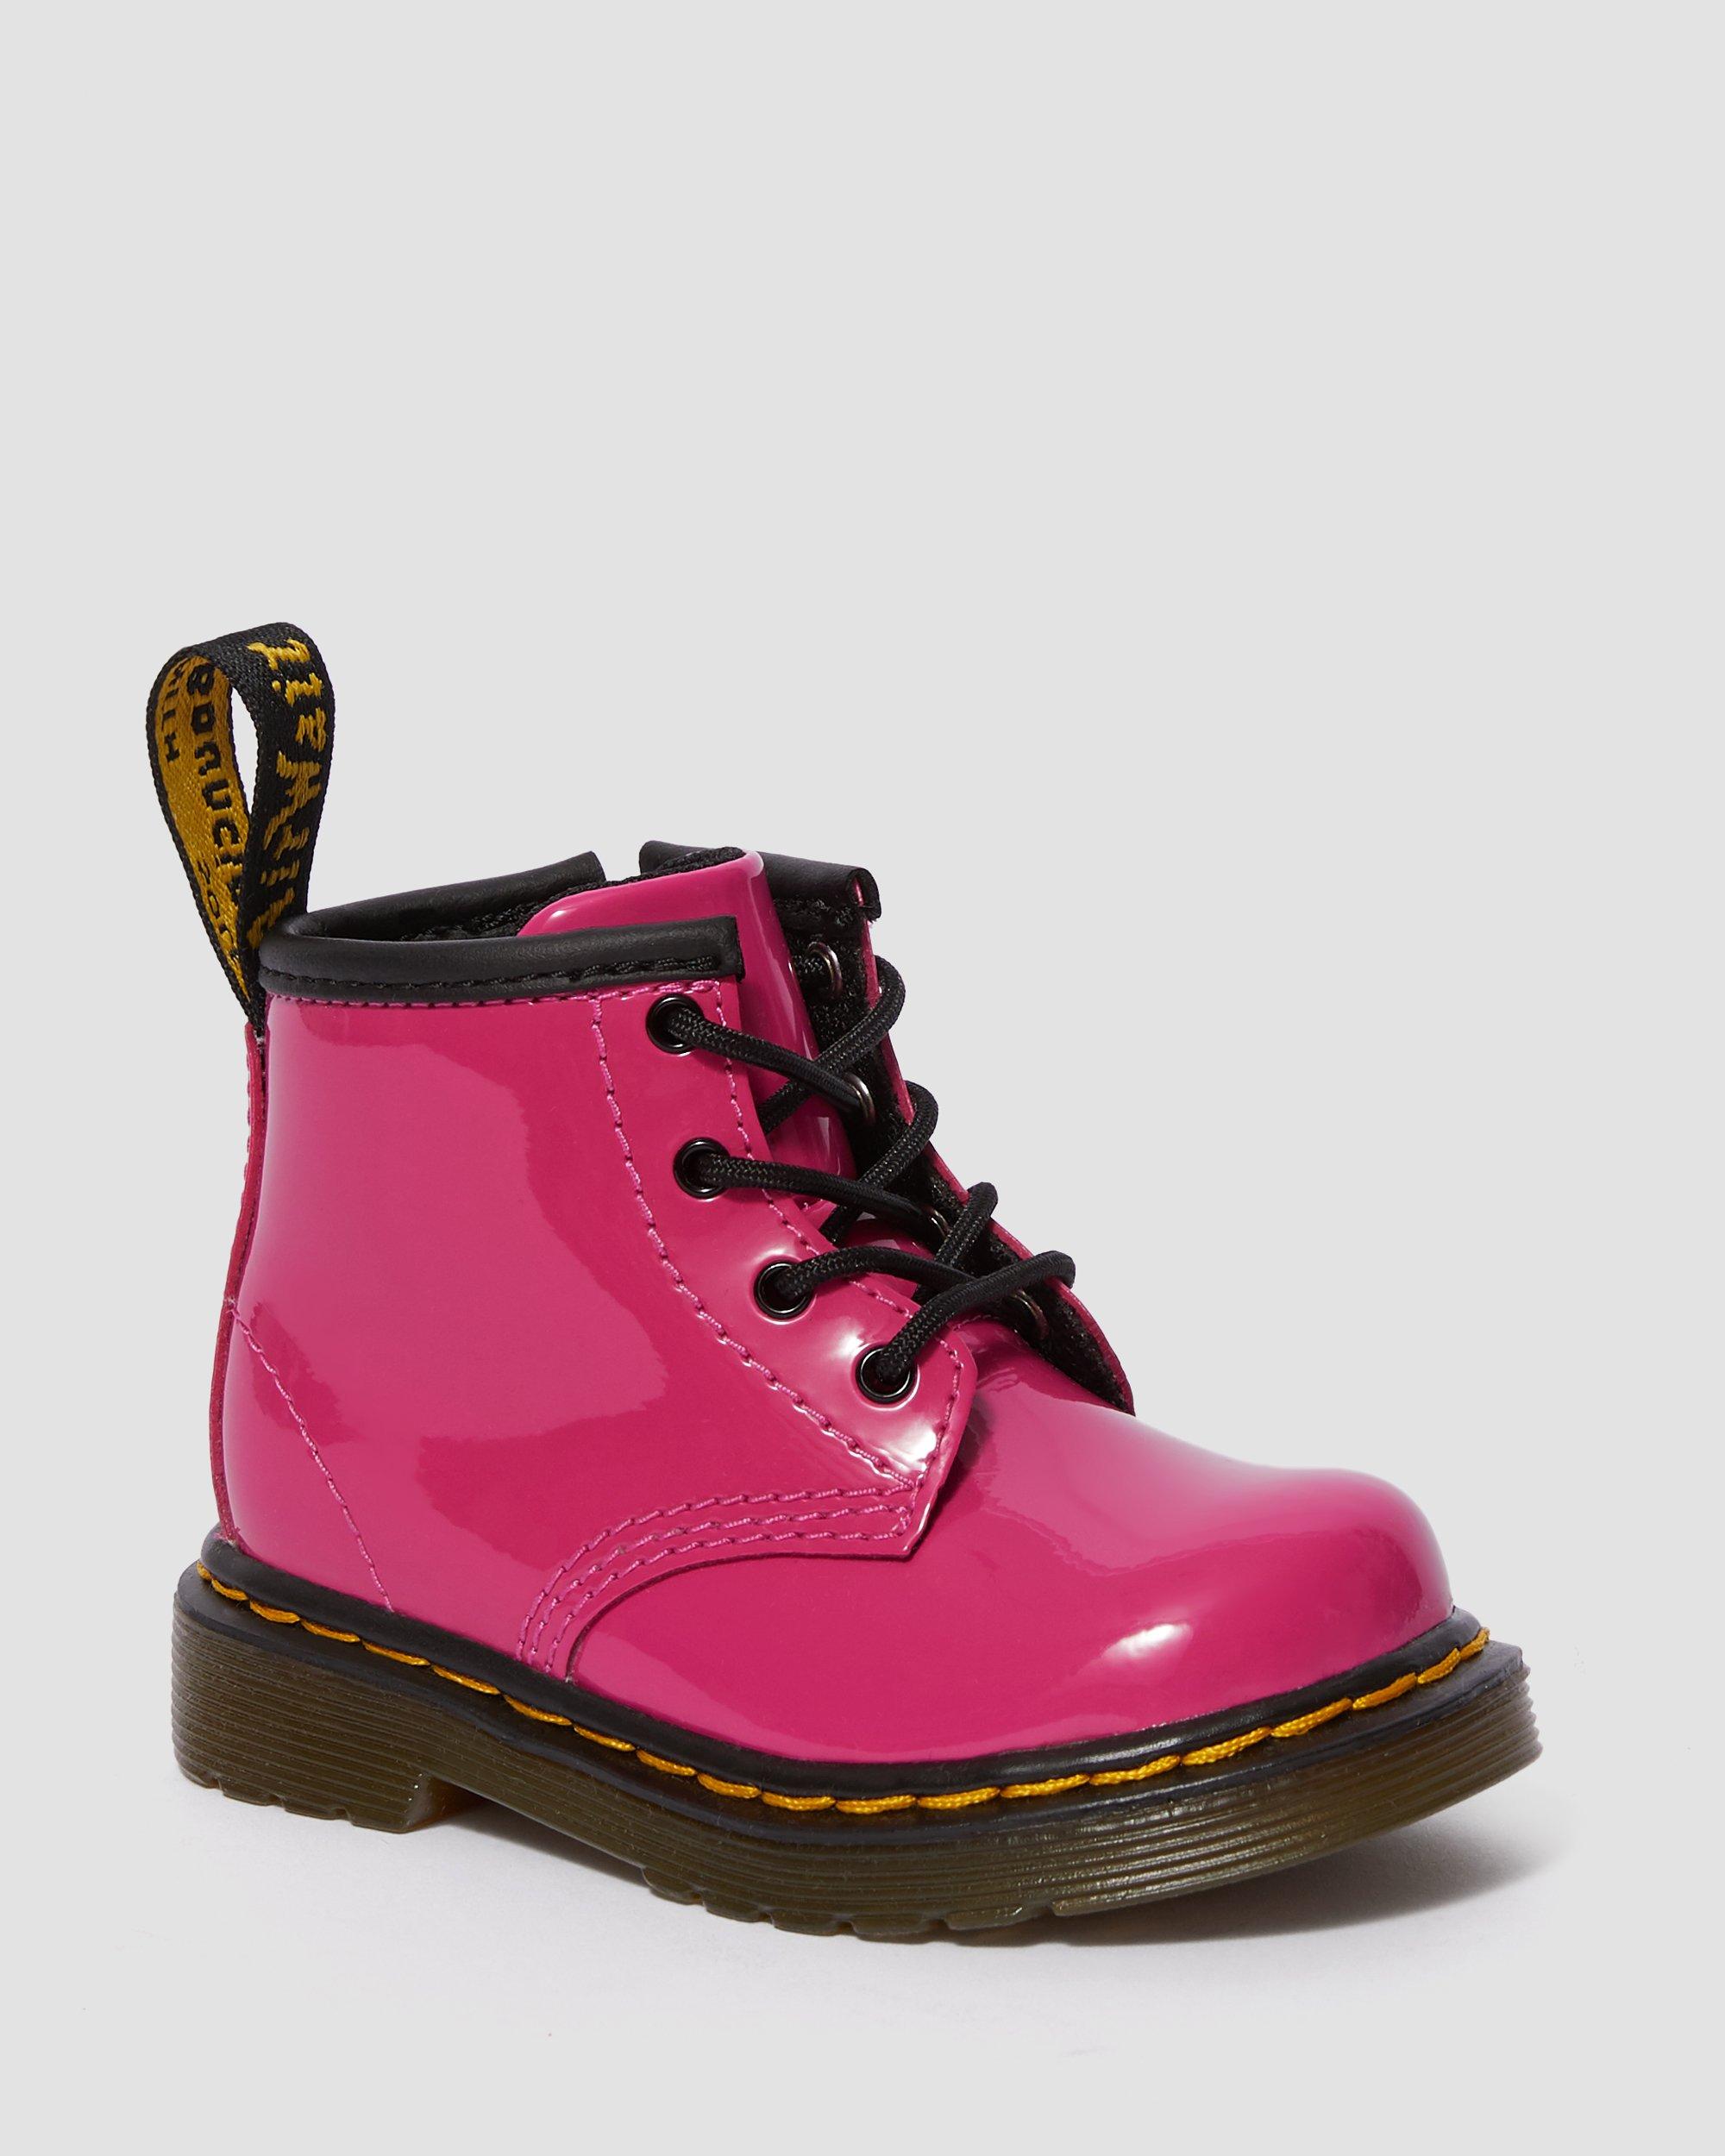 Infant 1460 Patent Leather Lace Up Boots in Plum